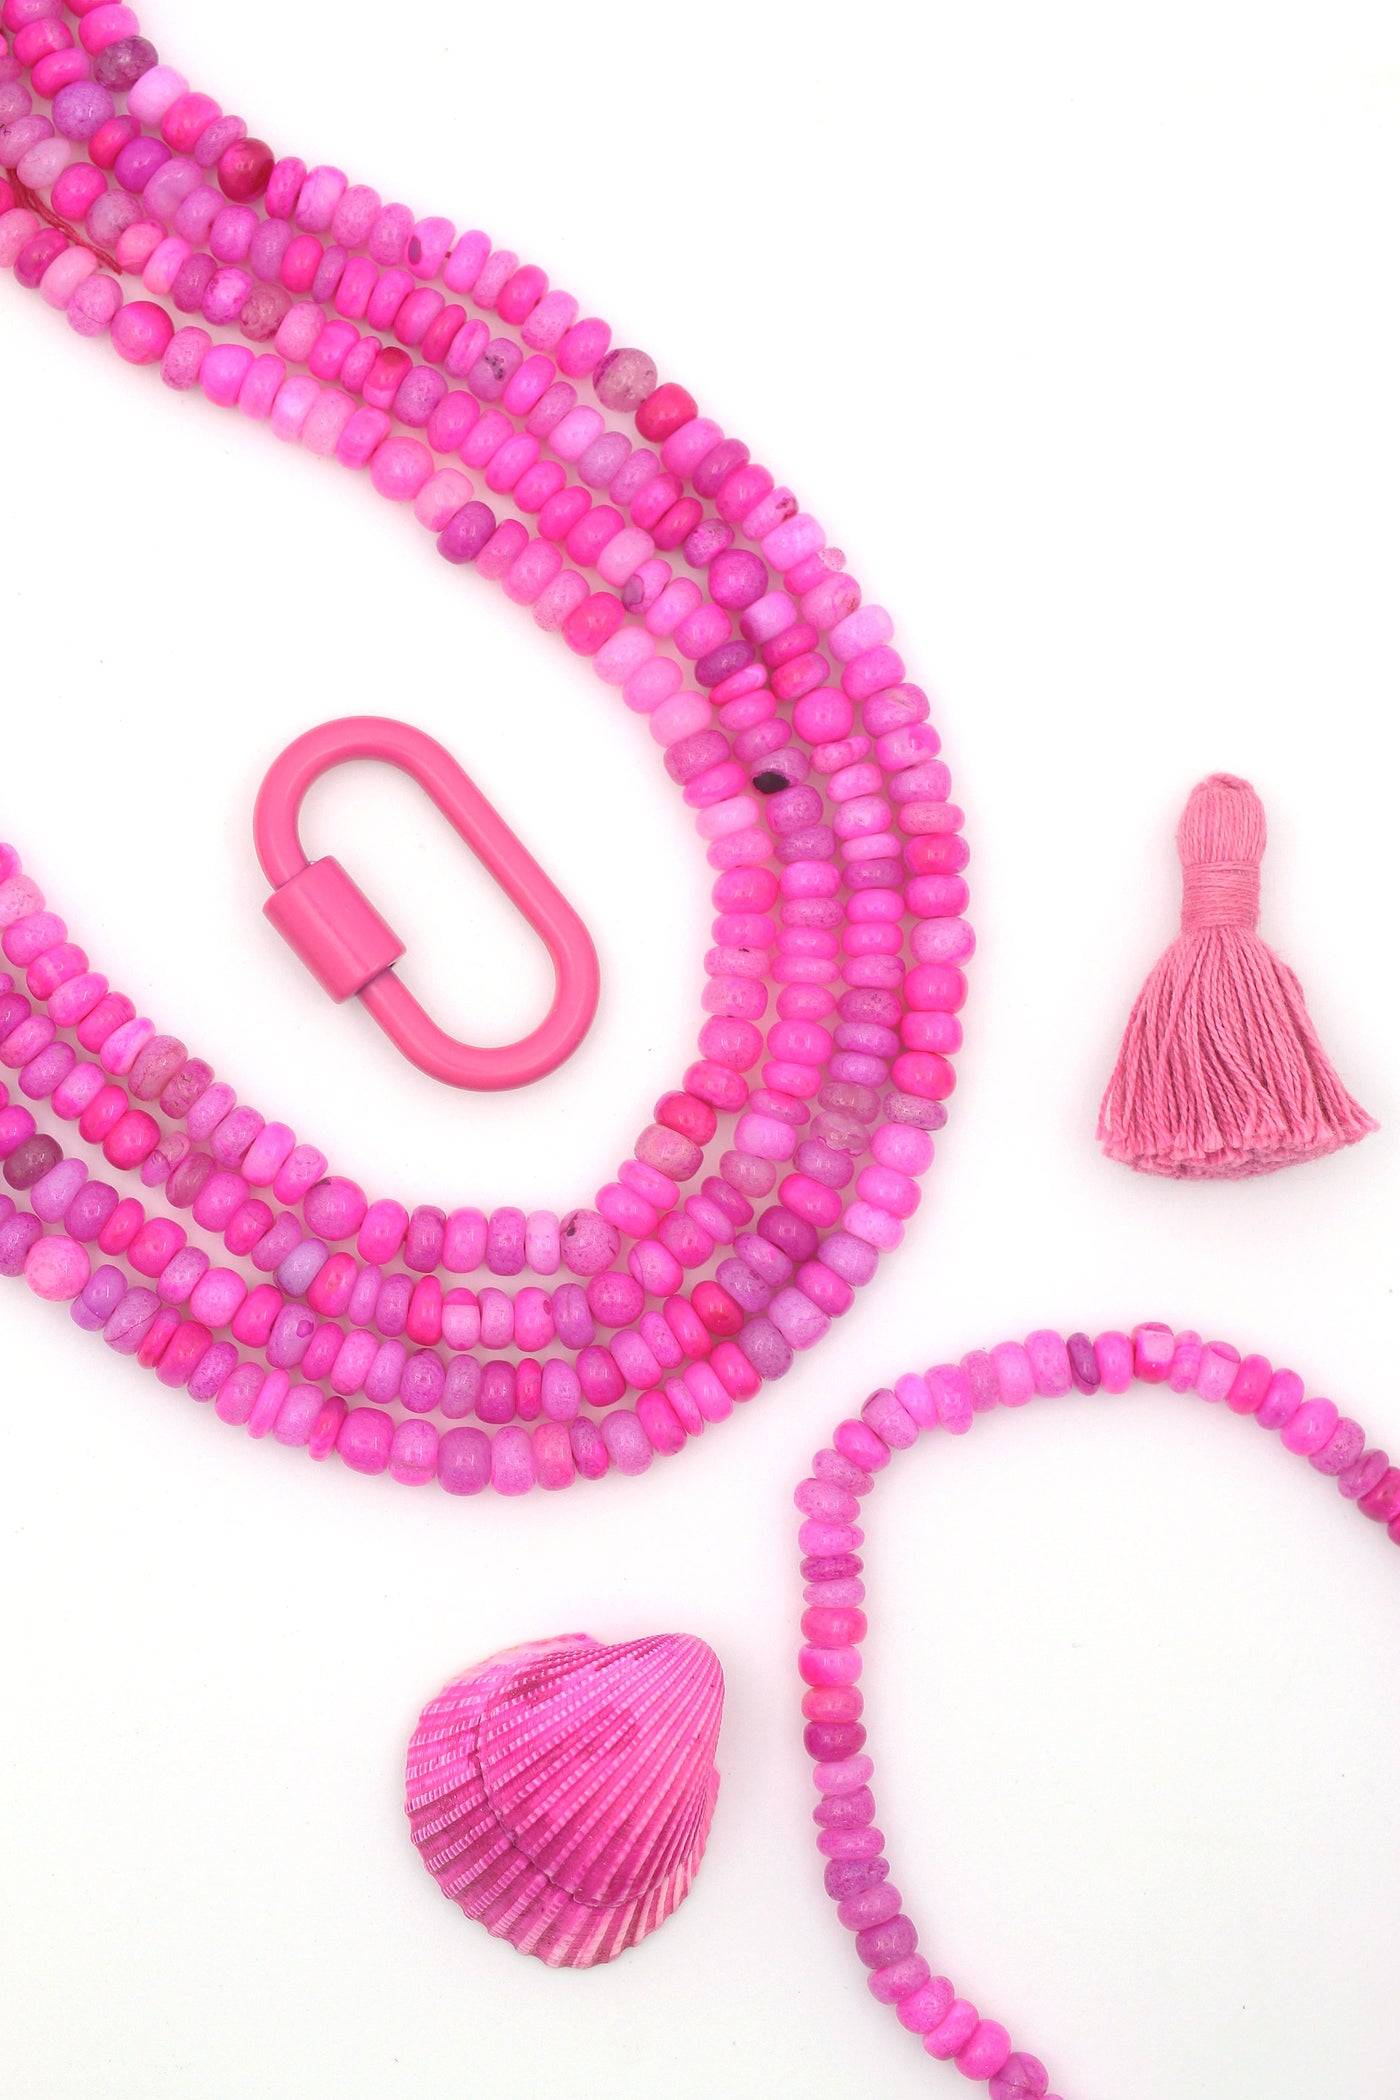 Beads for DIY Barbiecore jewelry and trendy pink DIY bracelets